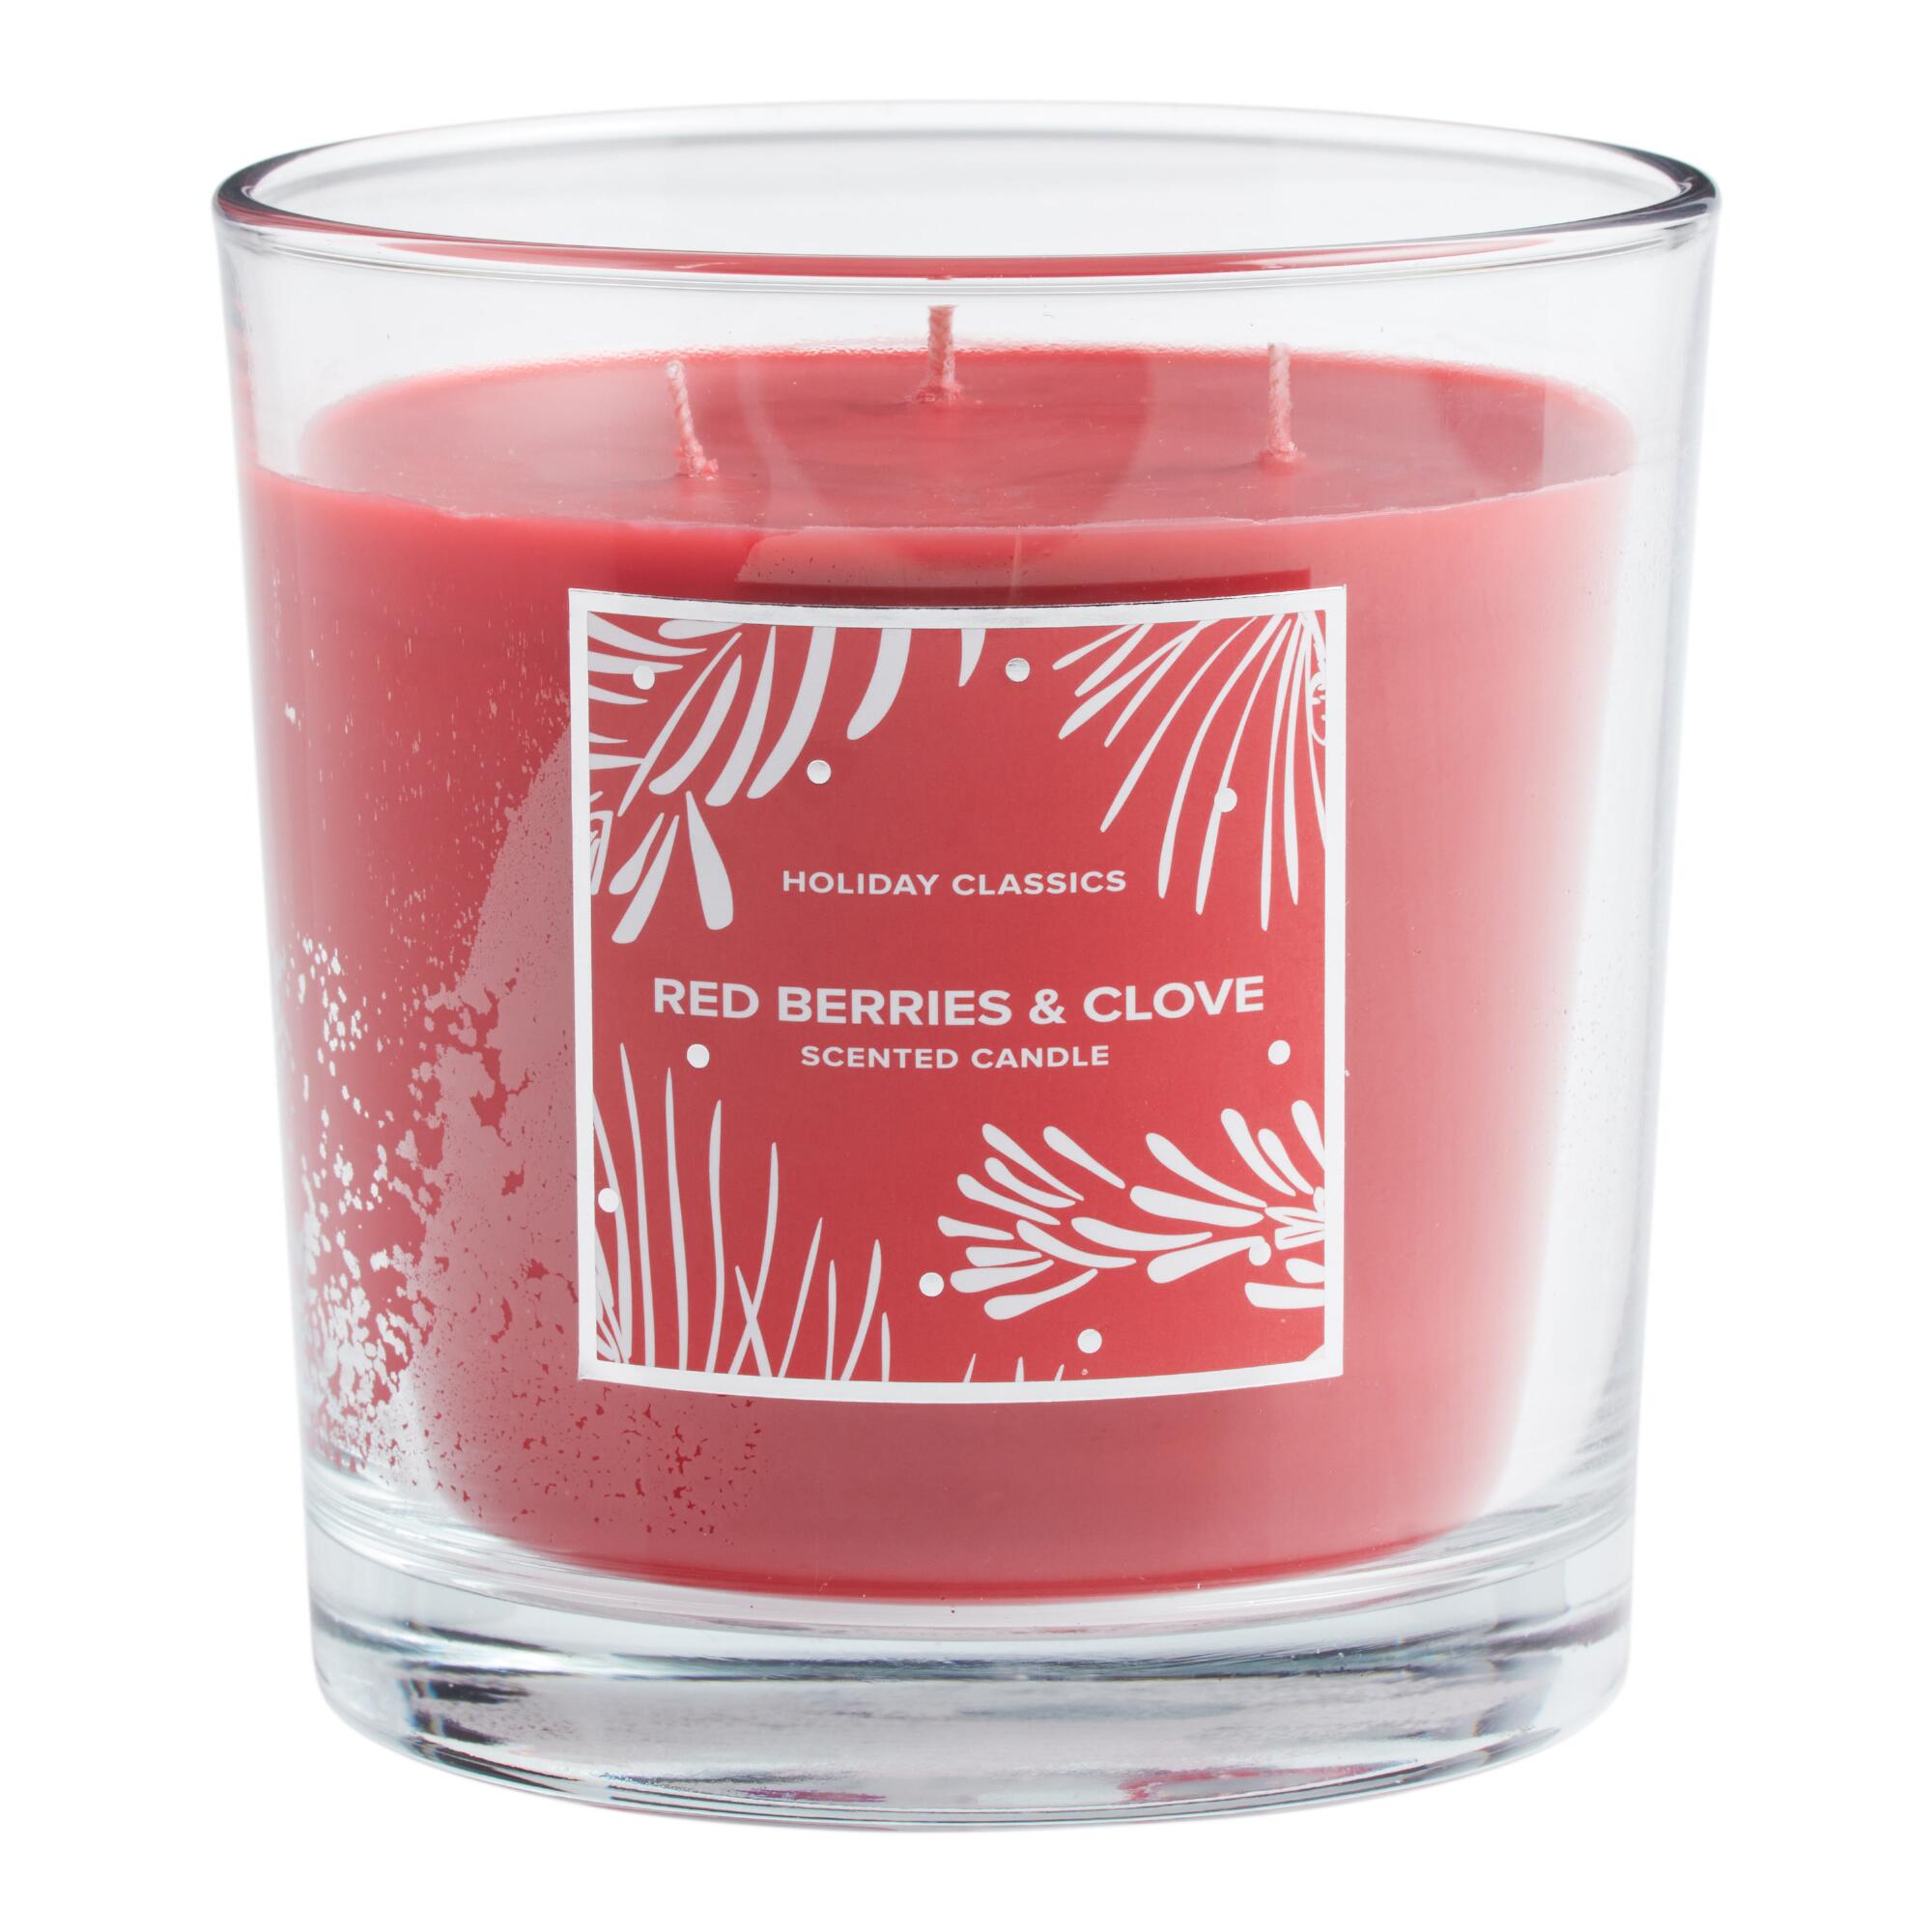 Red Berries and Clove 3 Wick Scented Candle - Scented Wax by World Market